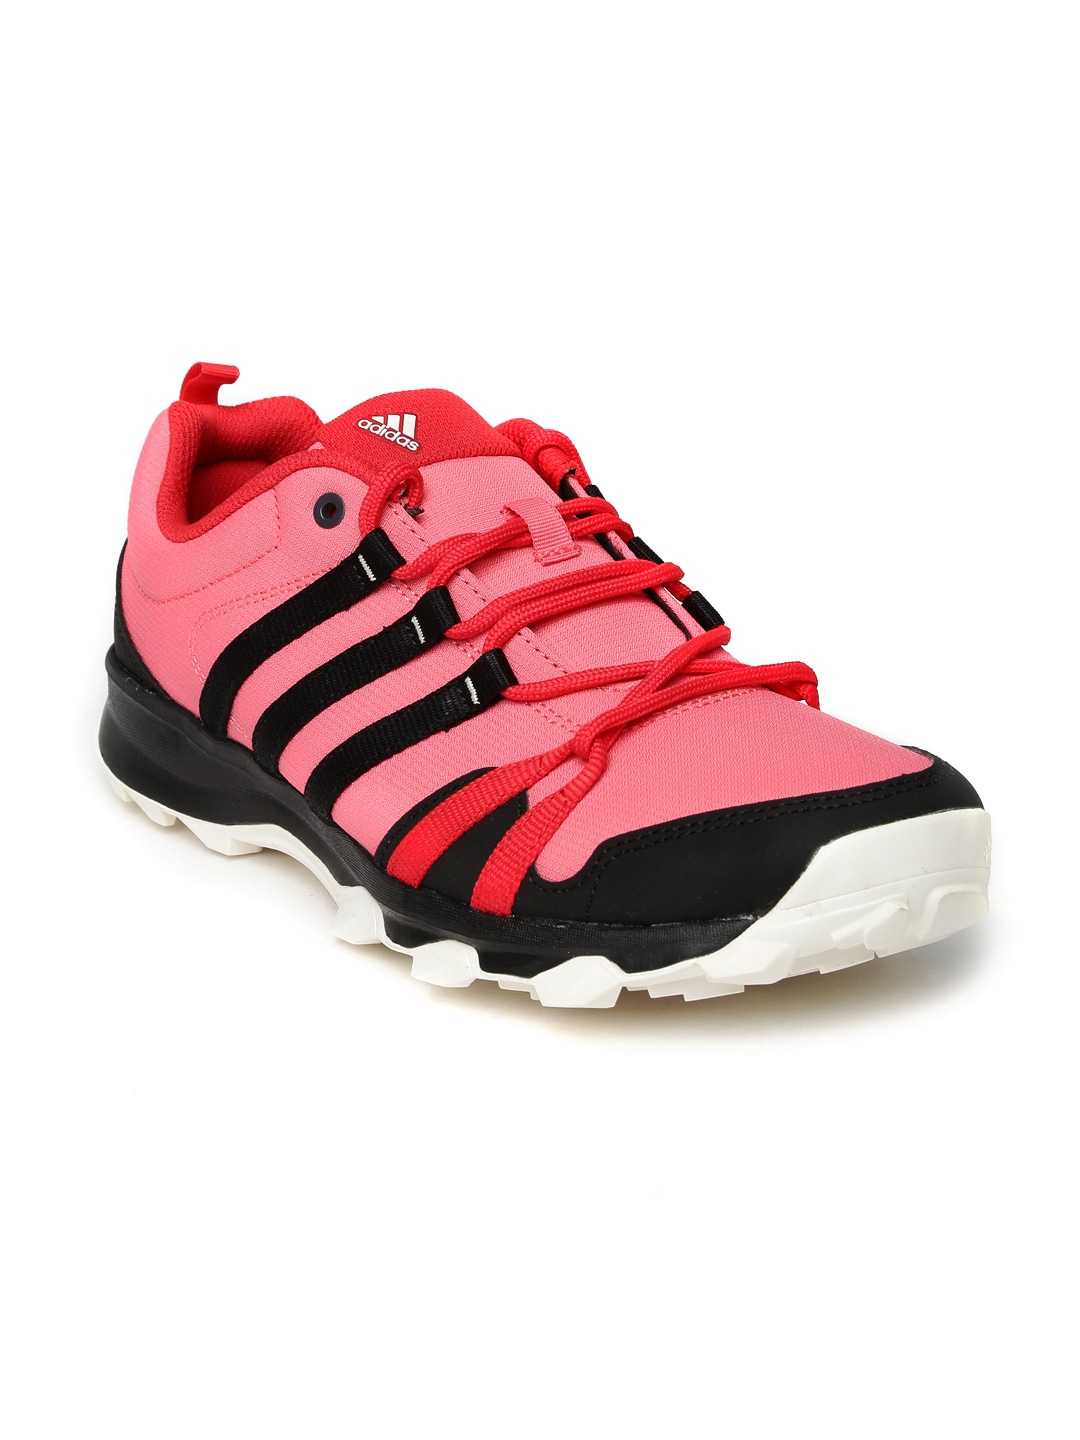 adidas party shoes